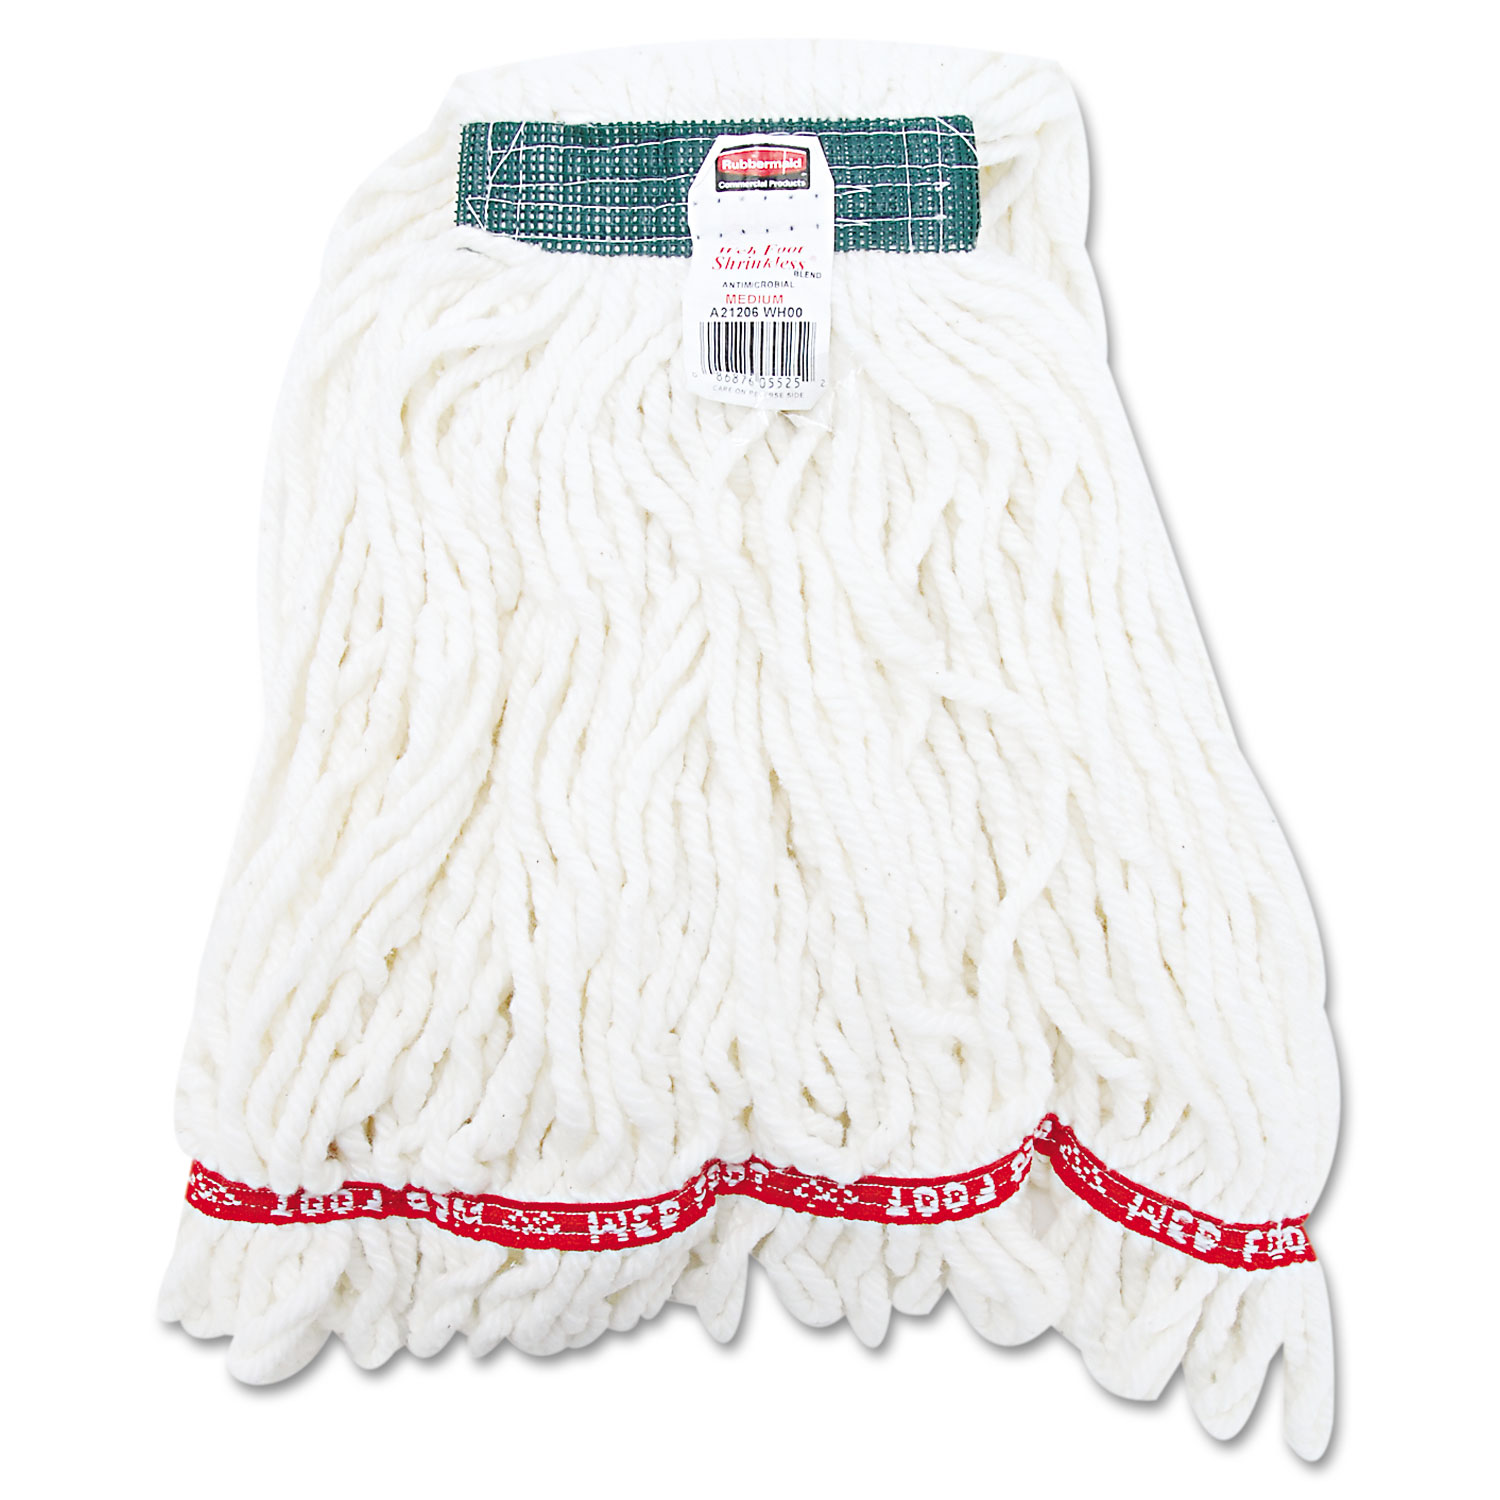  Rubbermaid Commercial FGA21206WH00 Web Foot Shrinkless Looped-End Wet Mop Head, Cotton/Synthetic, Medium, White (RCPA21206WHI) 